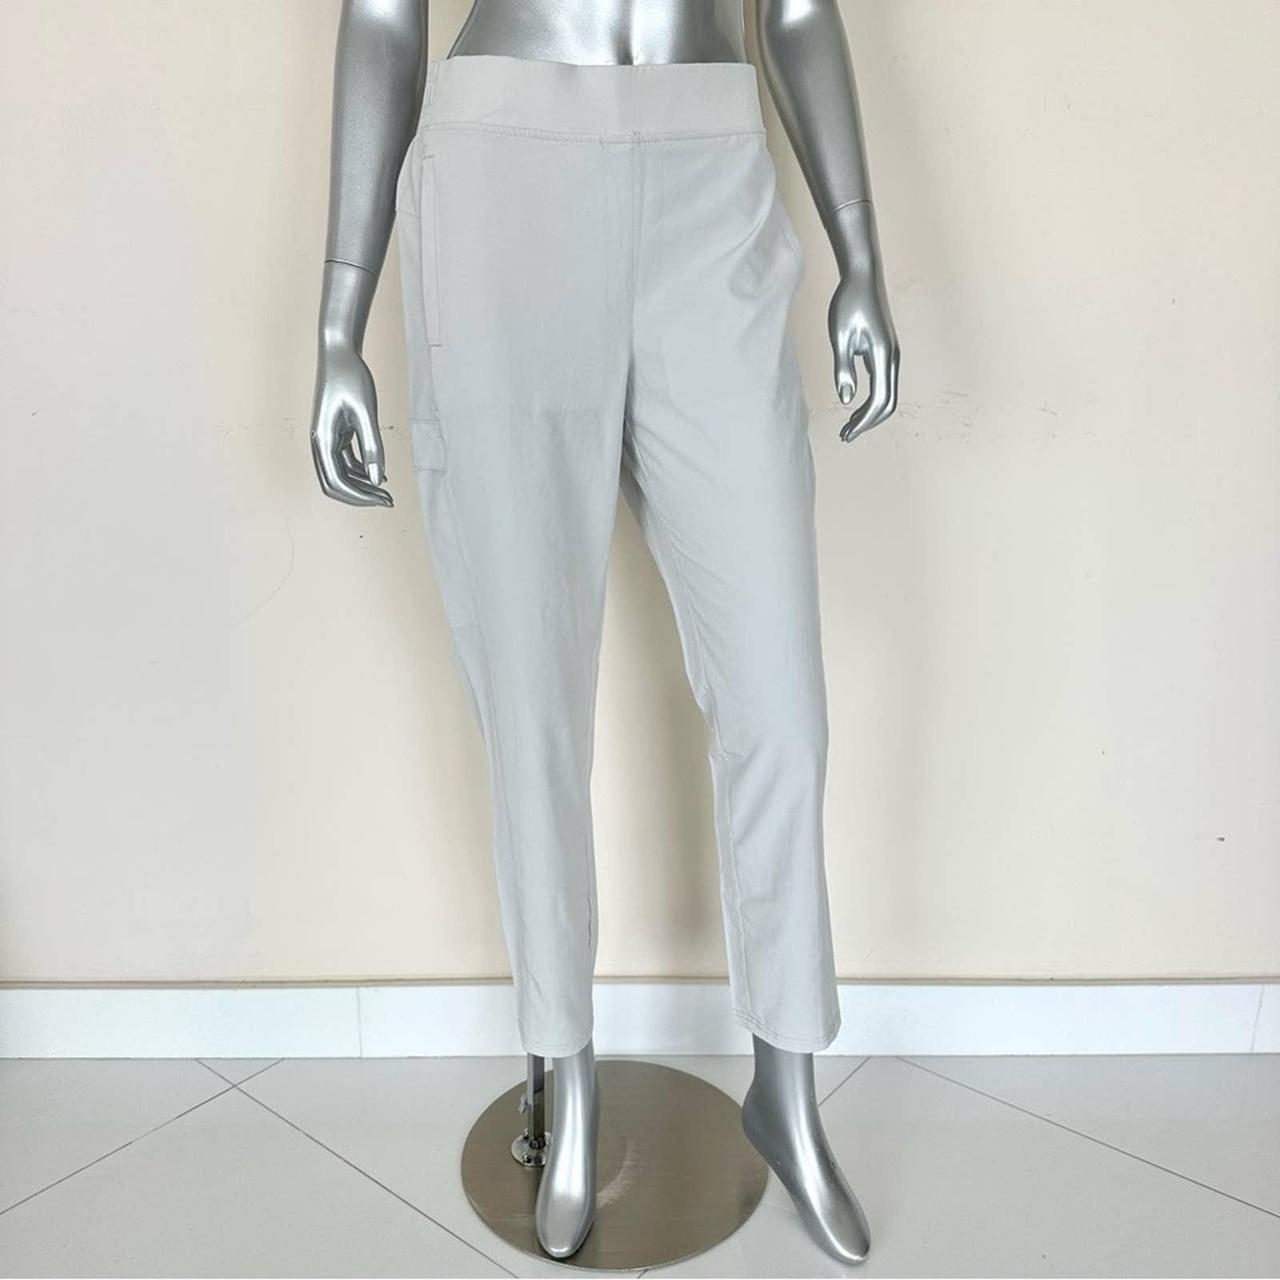 NEW!!! Apana women pants size S New condition, - Depop